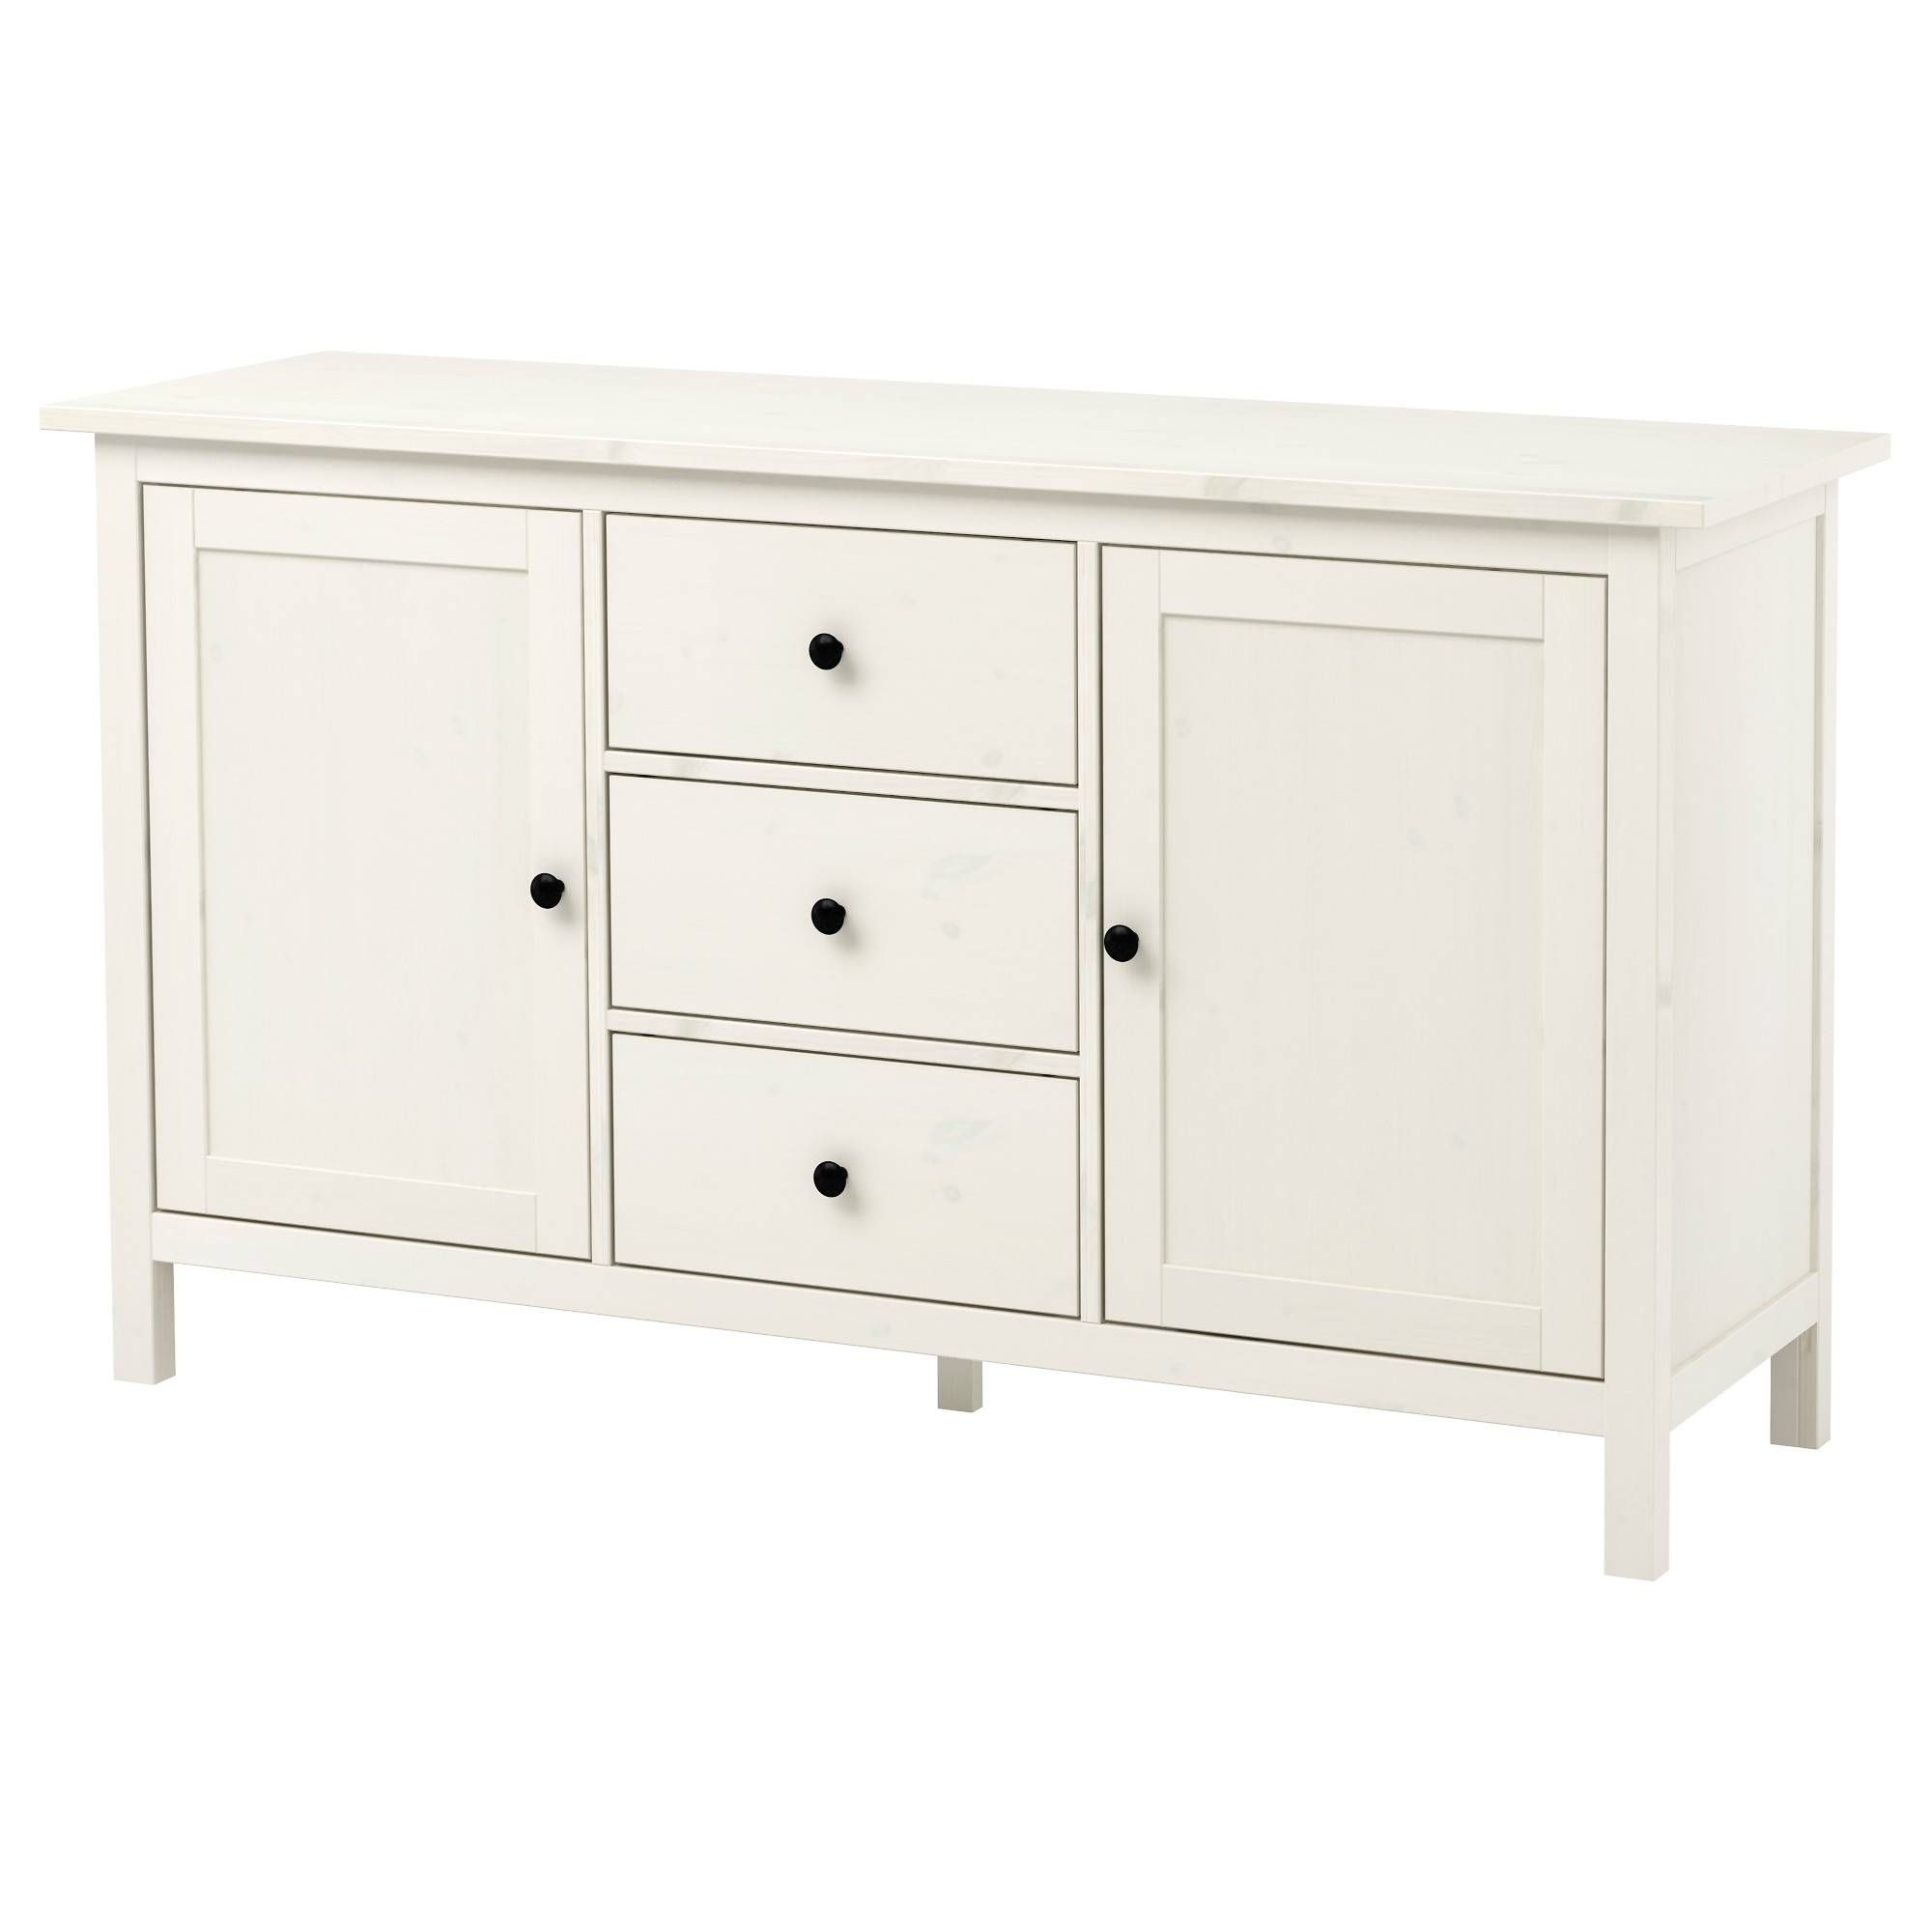 Hemnes Sideboard White Stain 157x88 Cm – Ikea For White Sideboards For Sale (View 2 of 20)